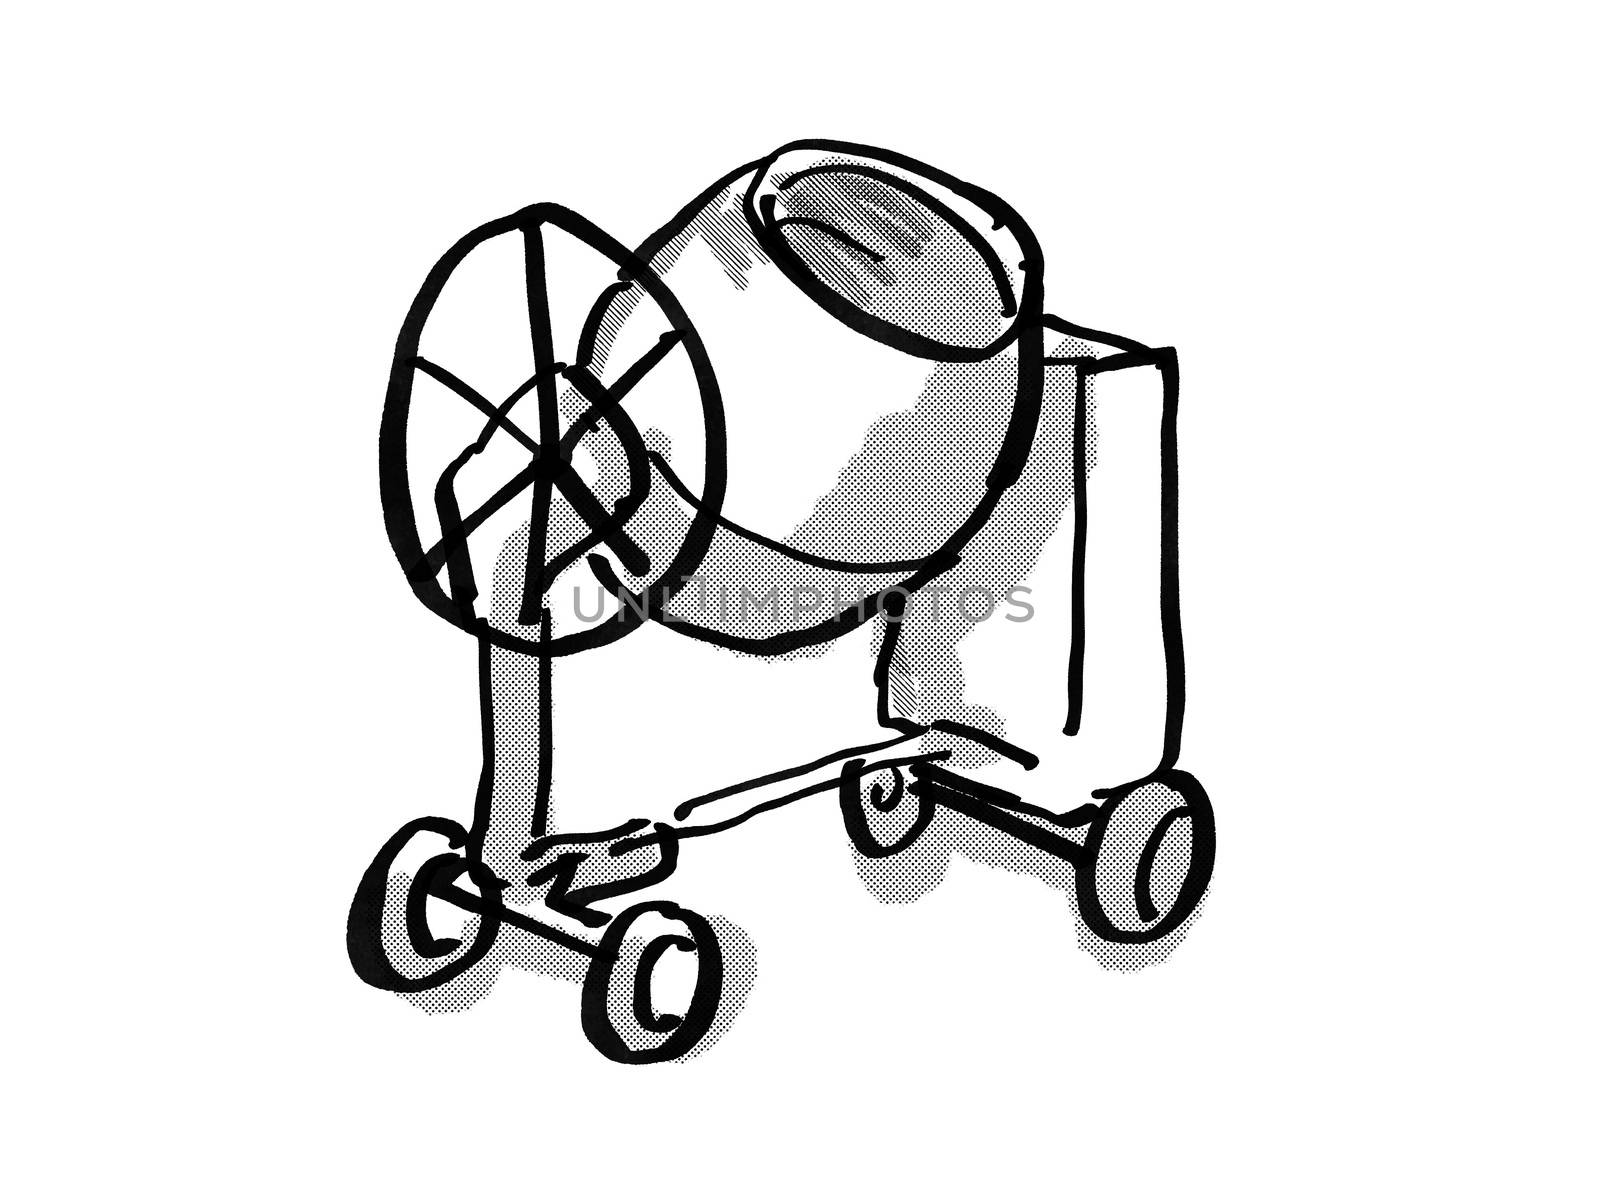 Retro cartoon style drawing of a cement mixer on isolated white background done in black and white